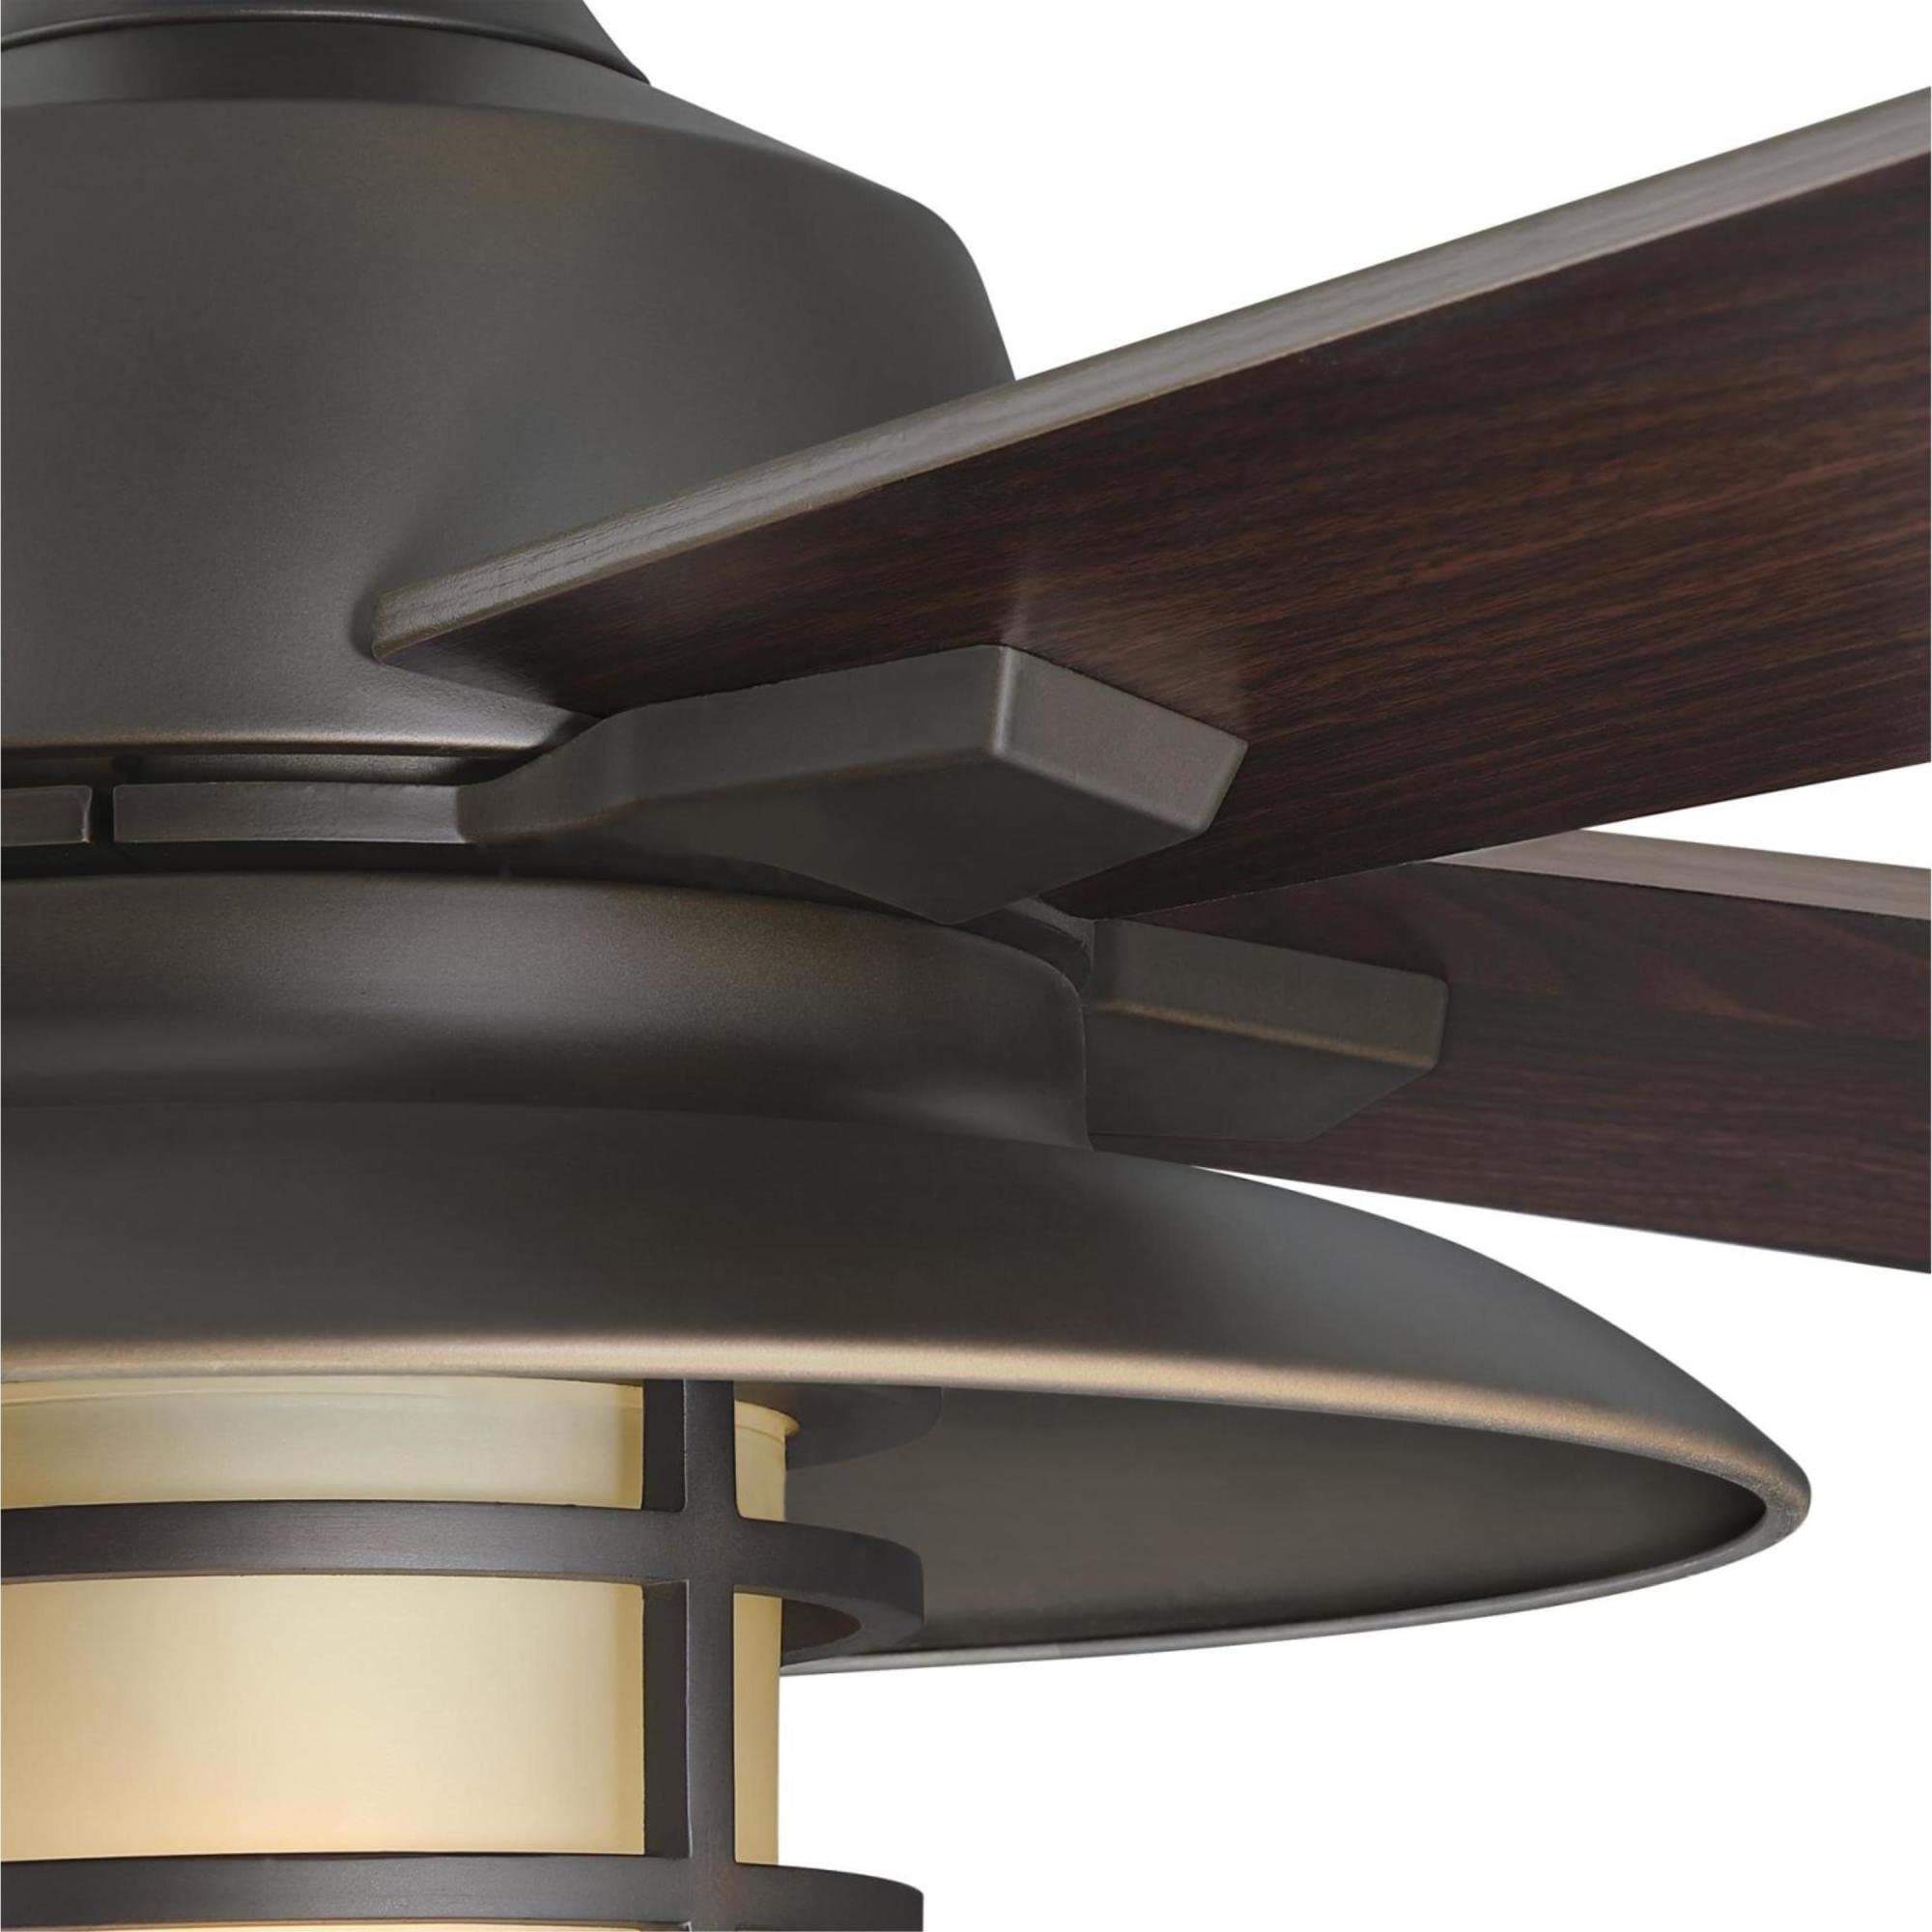 Westinghouse Lighting 74005B00 Porto, Smart WiFi Ceiling Fan Compatible with Amazon Alexa and Google Home with LED Light, Remote Control, 52 Inch, Black-Bronze Finish, Amber Frosted Glass